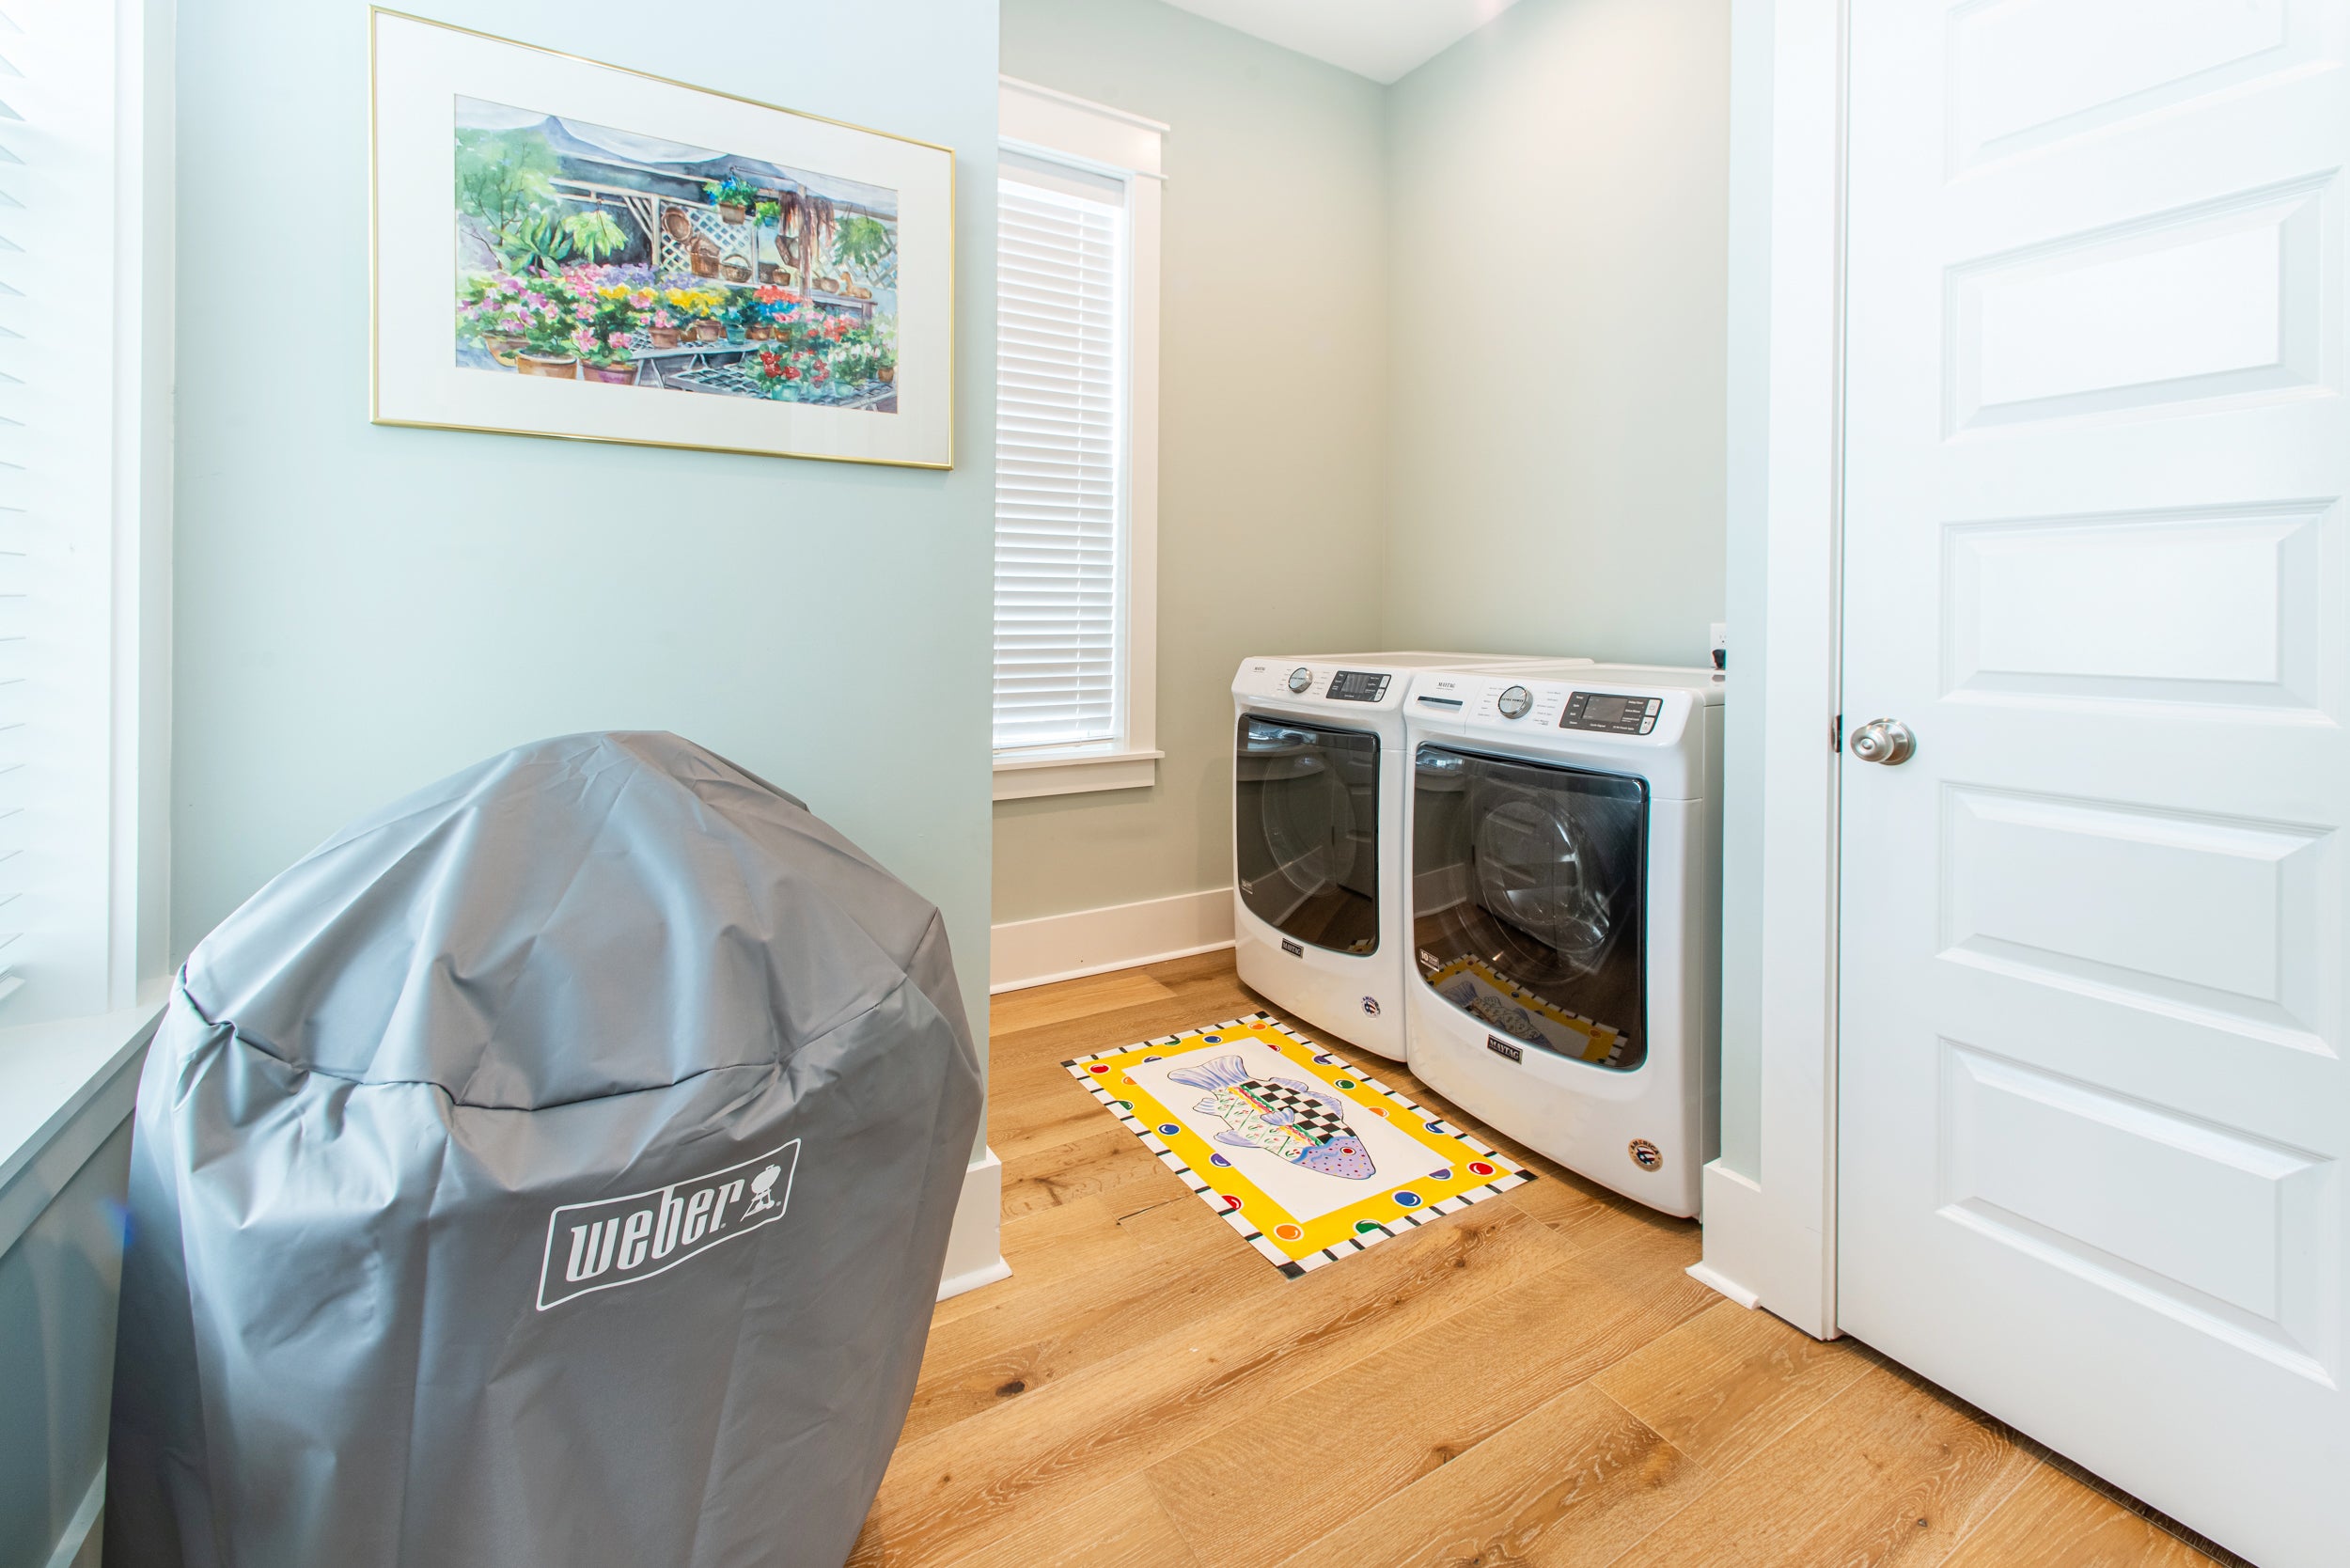 Laundry room for all your washing and drying needs